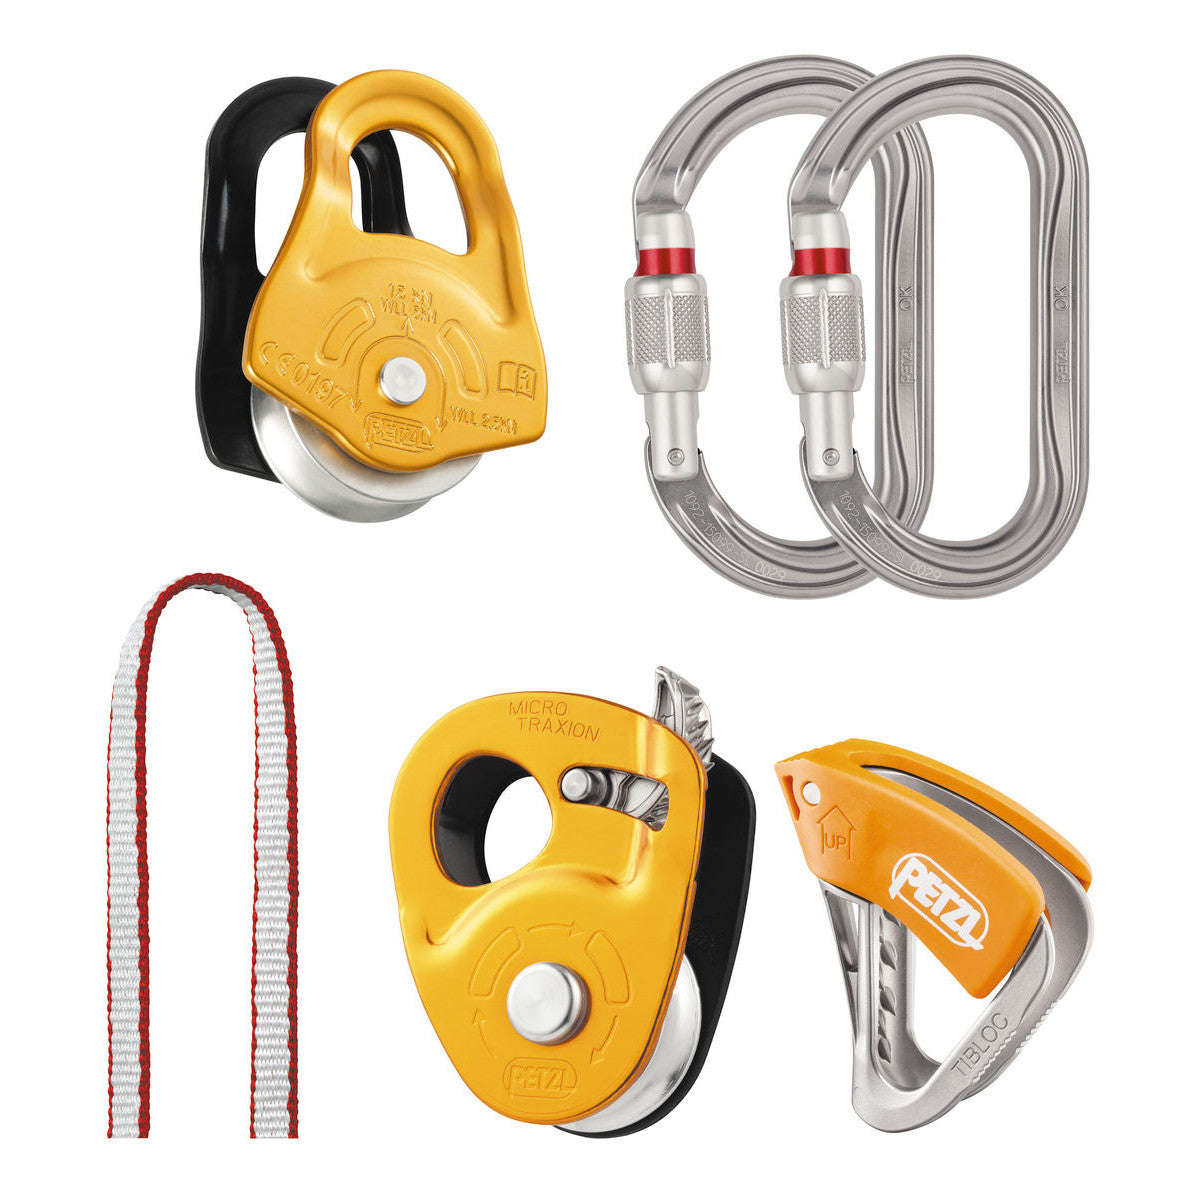 Petzl Crevasse Rescue Kit showing the Partner pulley in Light Orange, the 2 OK Oval Screwgates in silver, the new Tibloc with orange lever , 120cm Dyneema Sling in red, and Micro Traxion in light orange